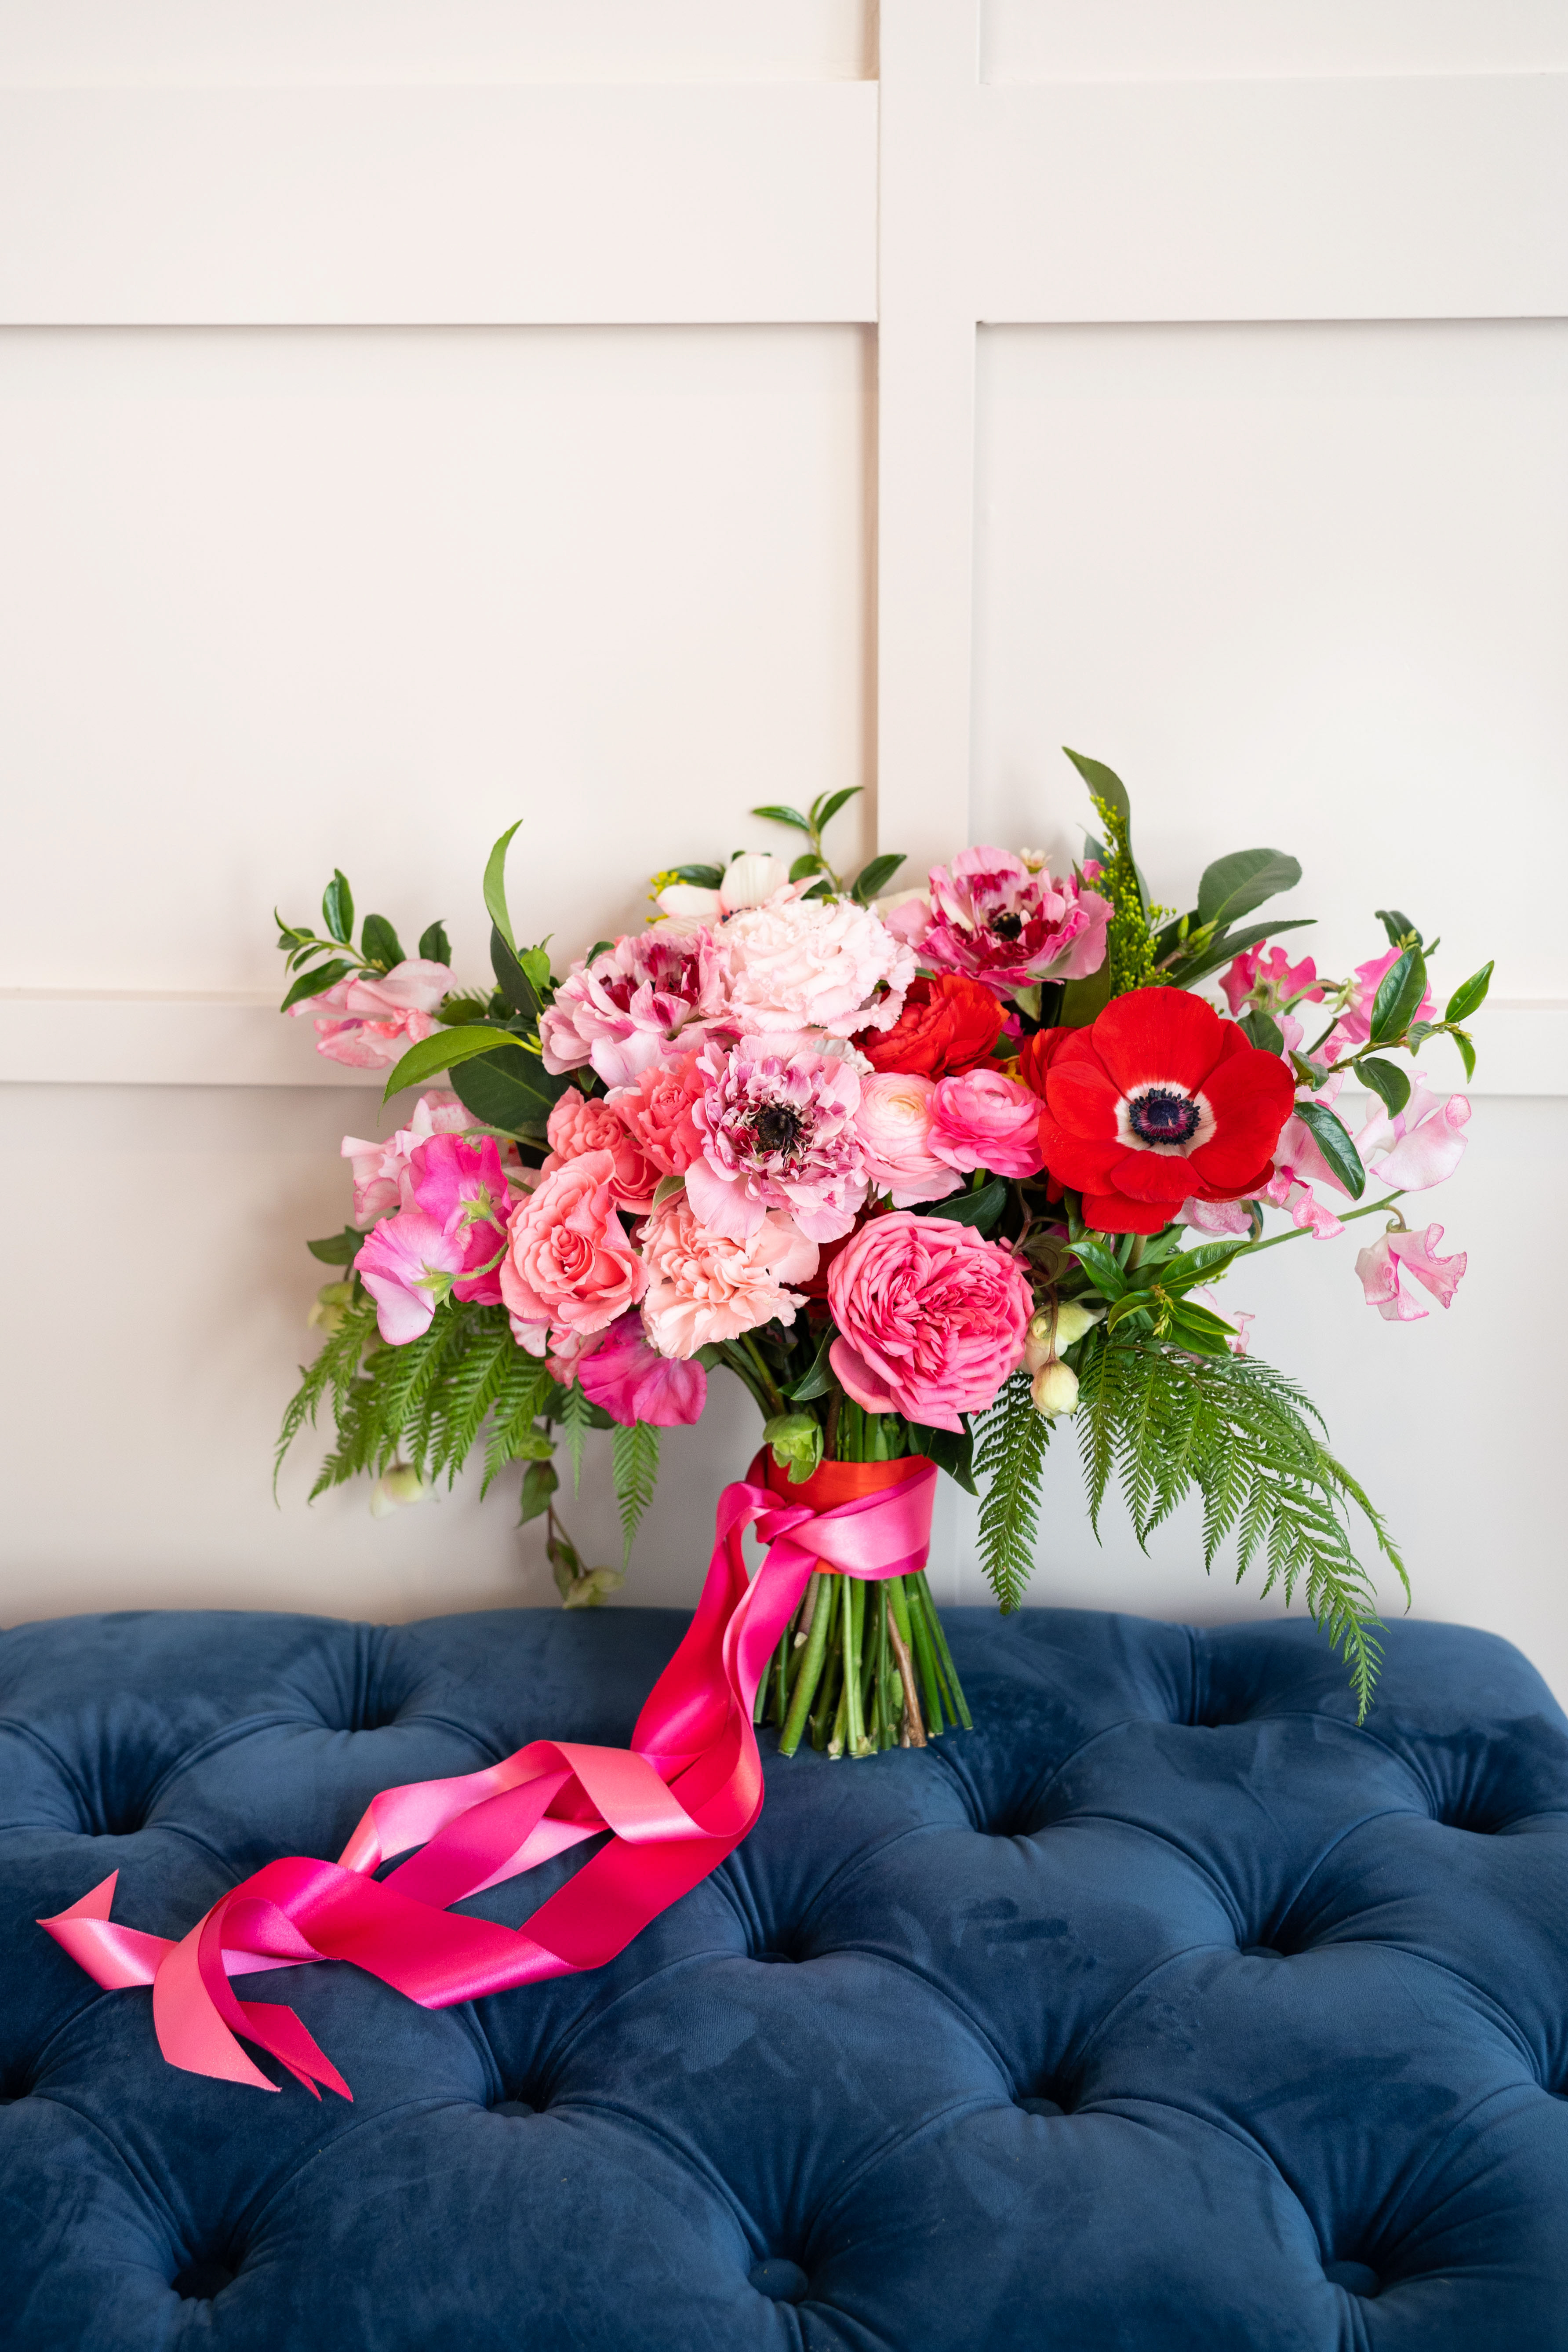 The lush bridal bouquet featuring vibrant red and pink ranunculus, anemones, and peonies.